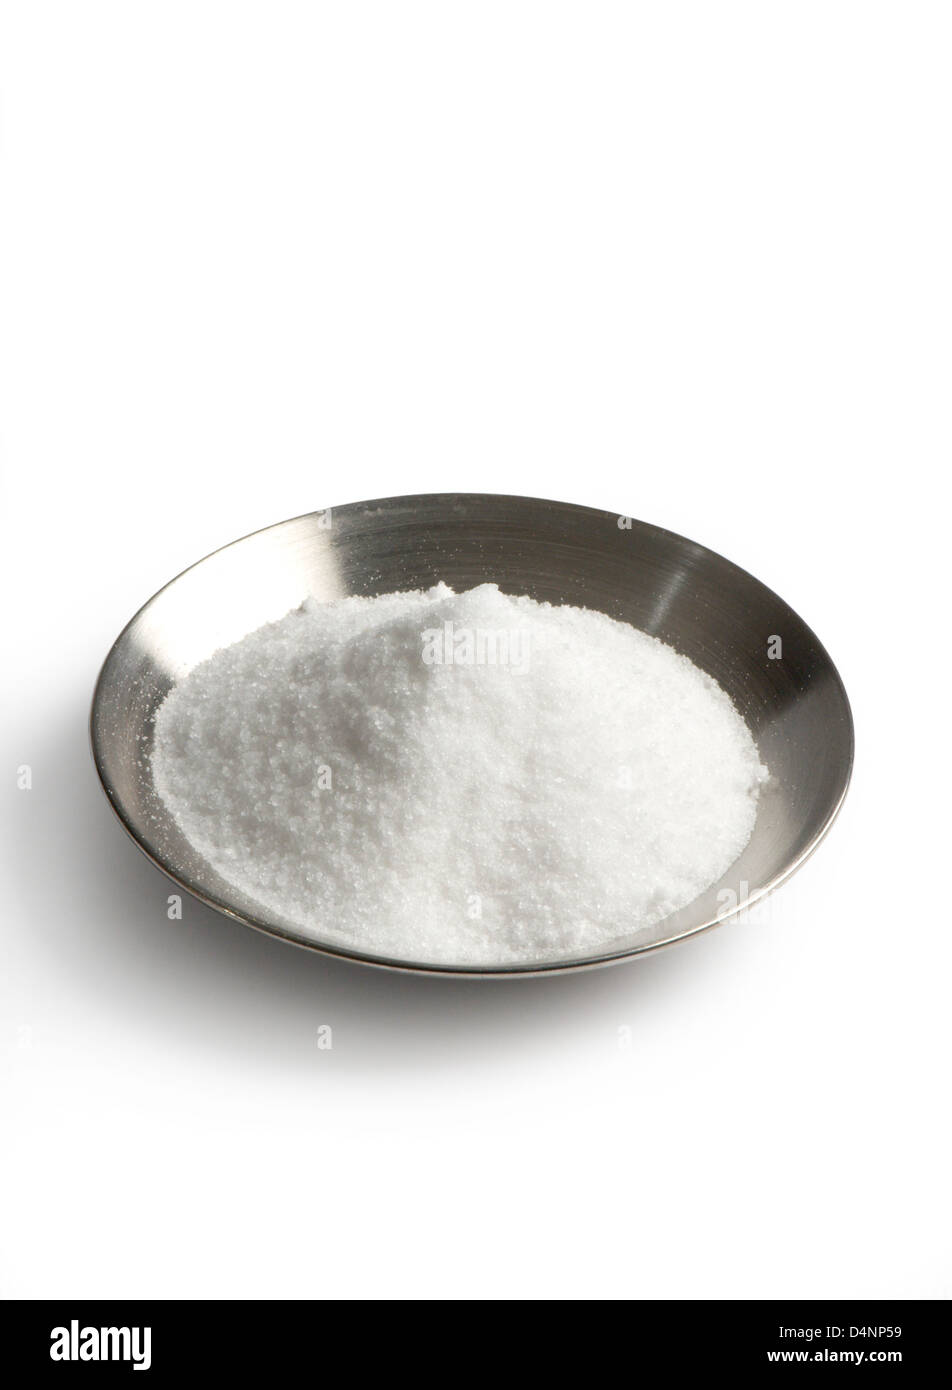 Table salt in small metal dsh Stock Photo